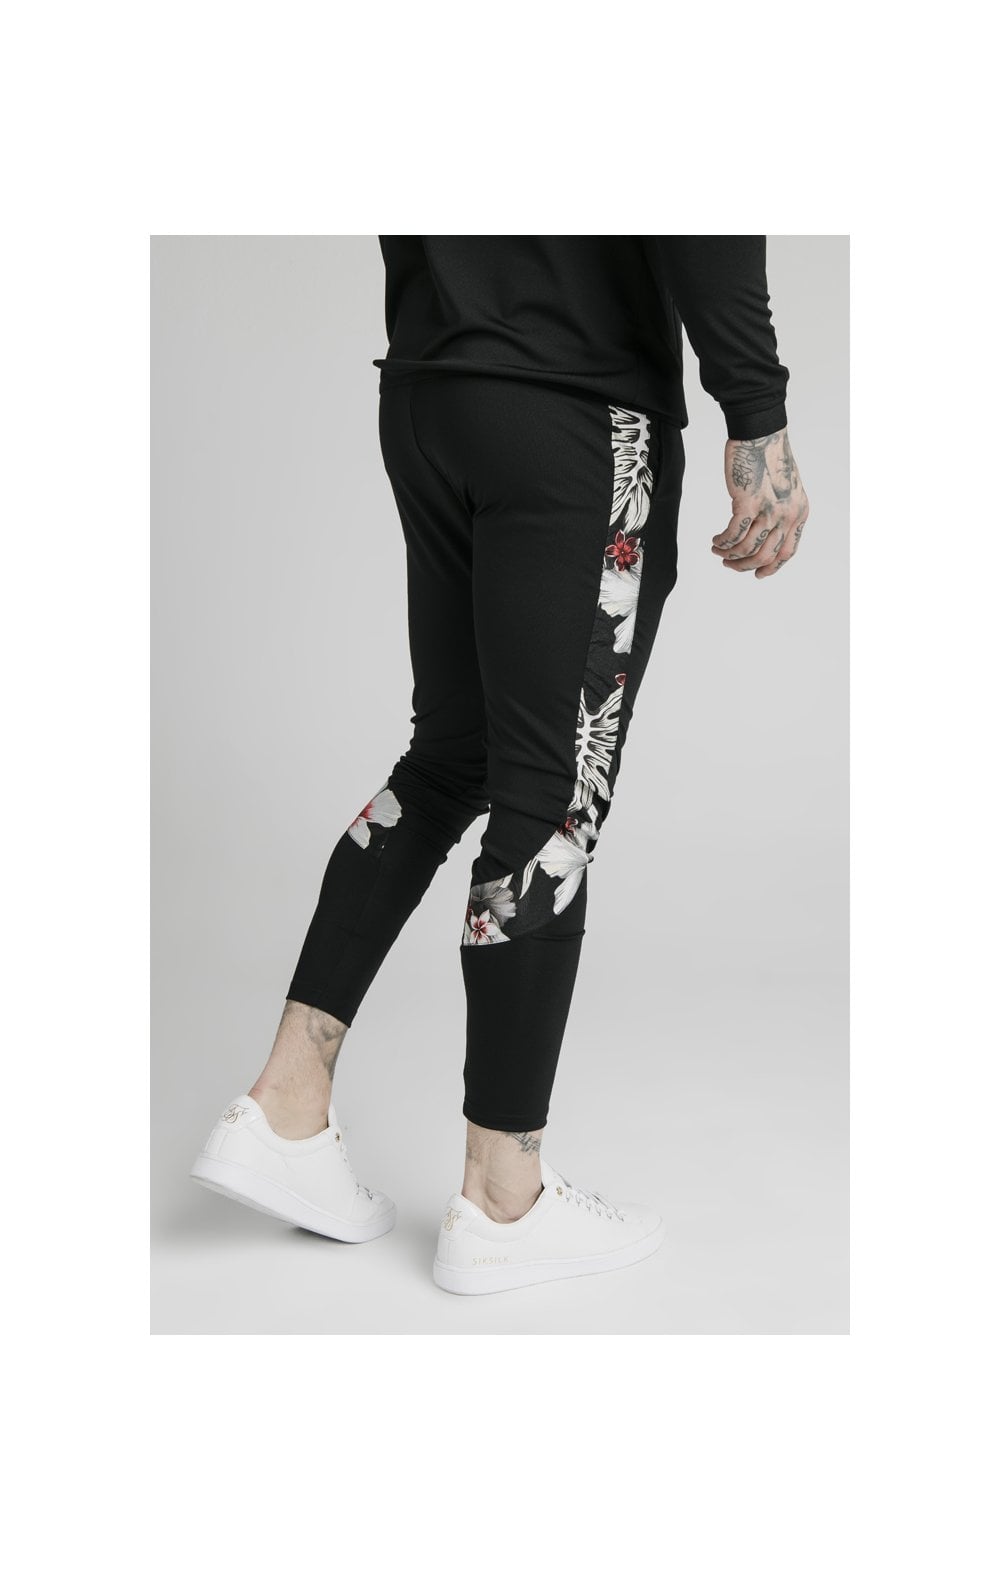 Load image into Gallery viewer, SikSilk Scope Floral Panel Track Pants - Black (3)